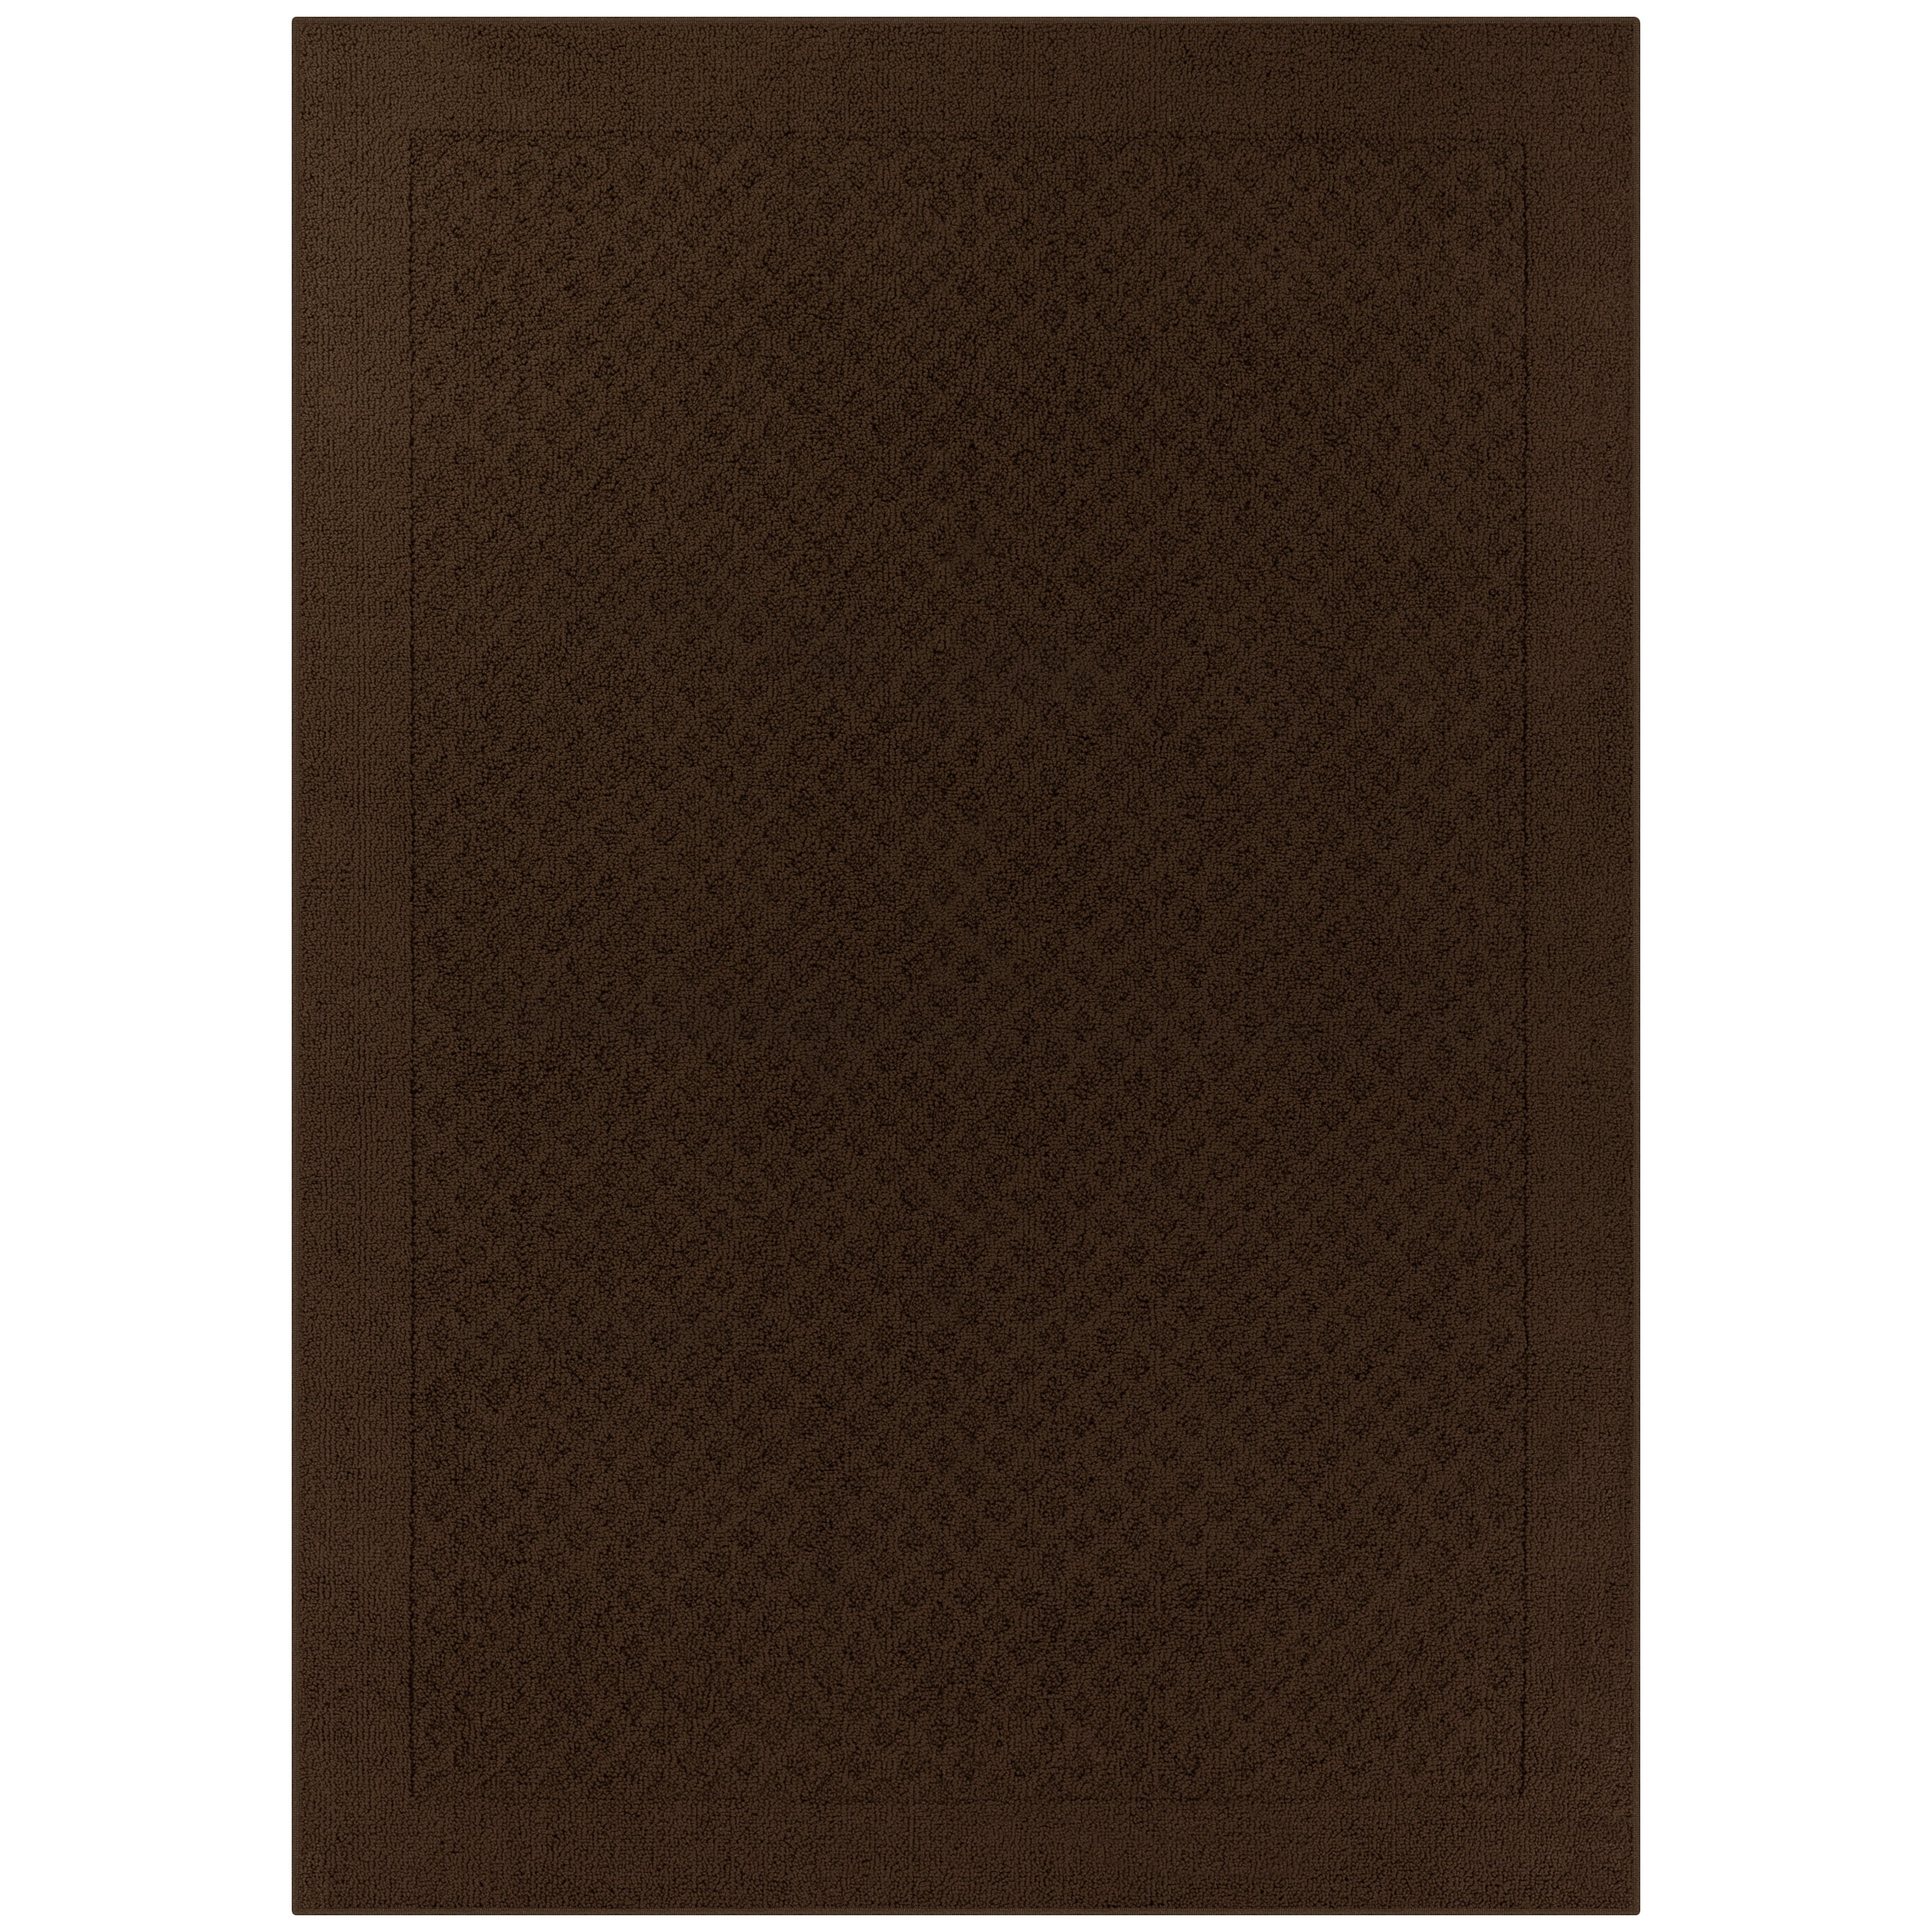  4'x45' - Rock Brown Multi - Indoor/Outdoor Area Rug Carpet,  Runners & Stair Treads with a Light Weight Latex Backing : Home & Kitchen